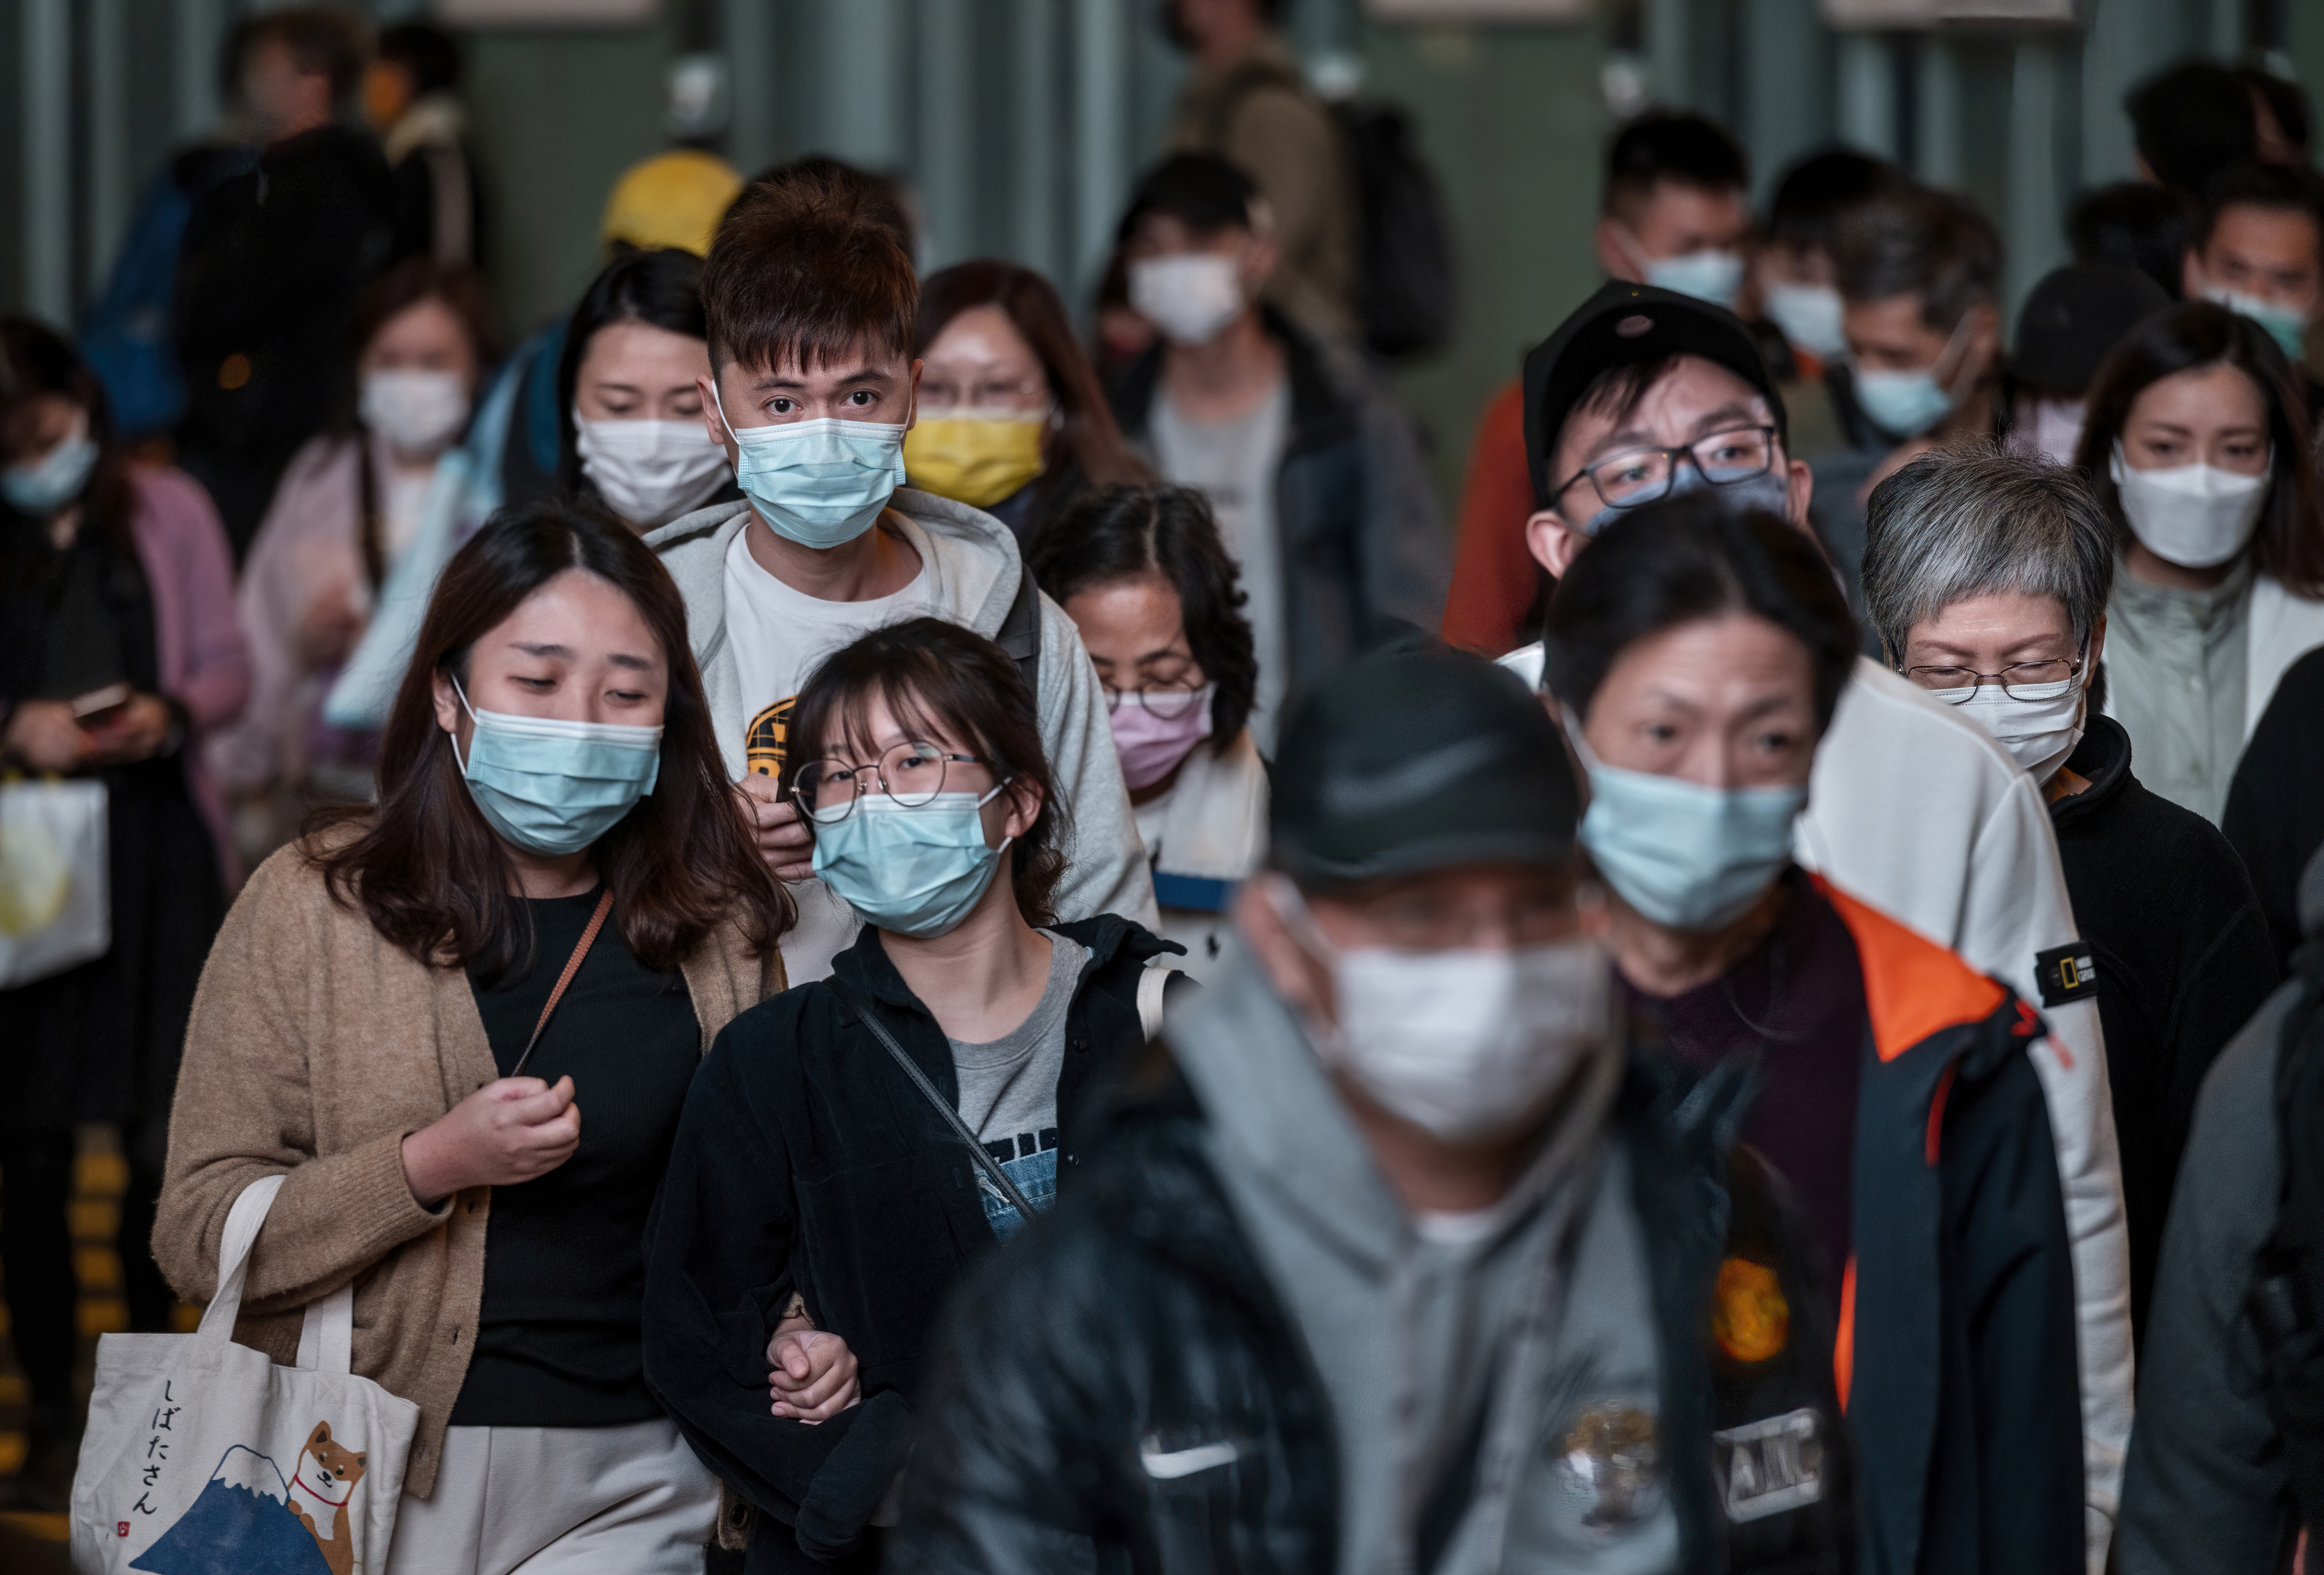 A crowd of people are seen wearing face masks as a measure to prevent the spread of the coronavirus as they walk through the zebra crossing in Hong Kong, China, on December 12, 2021.